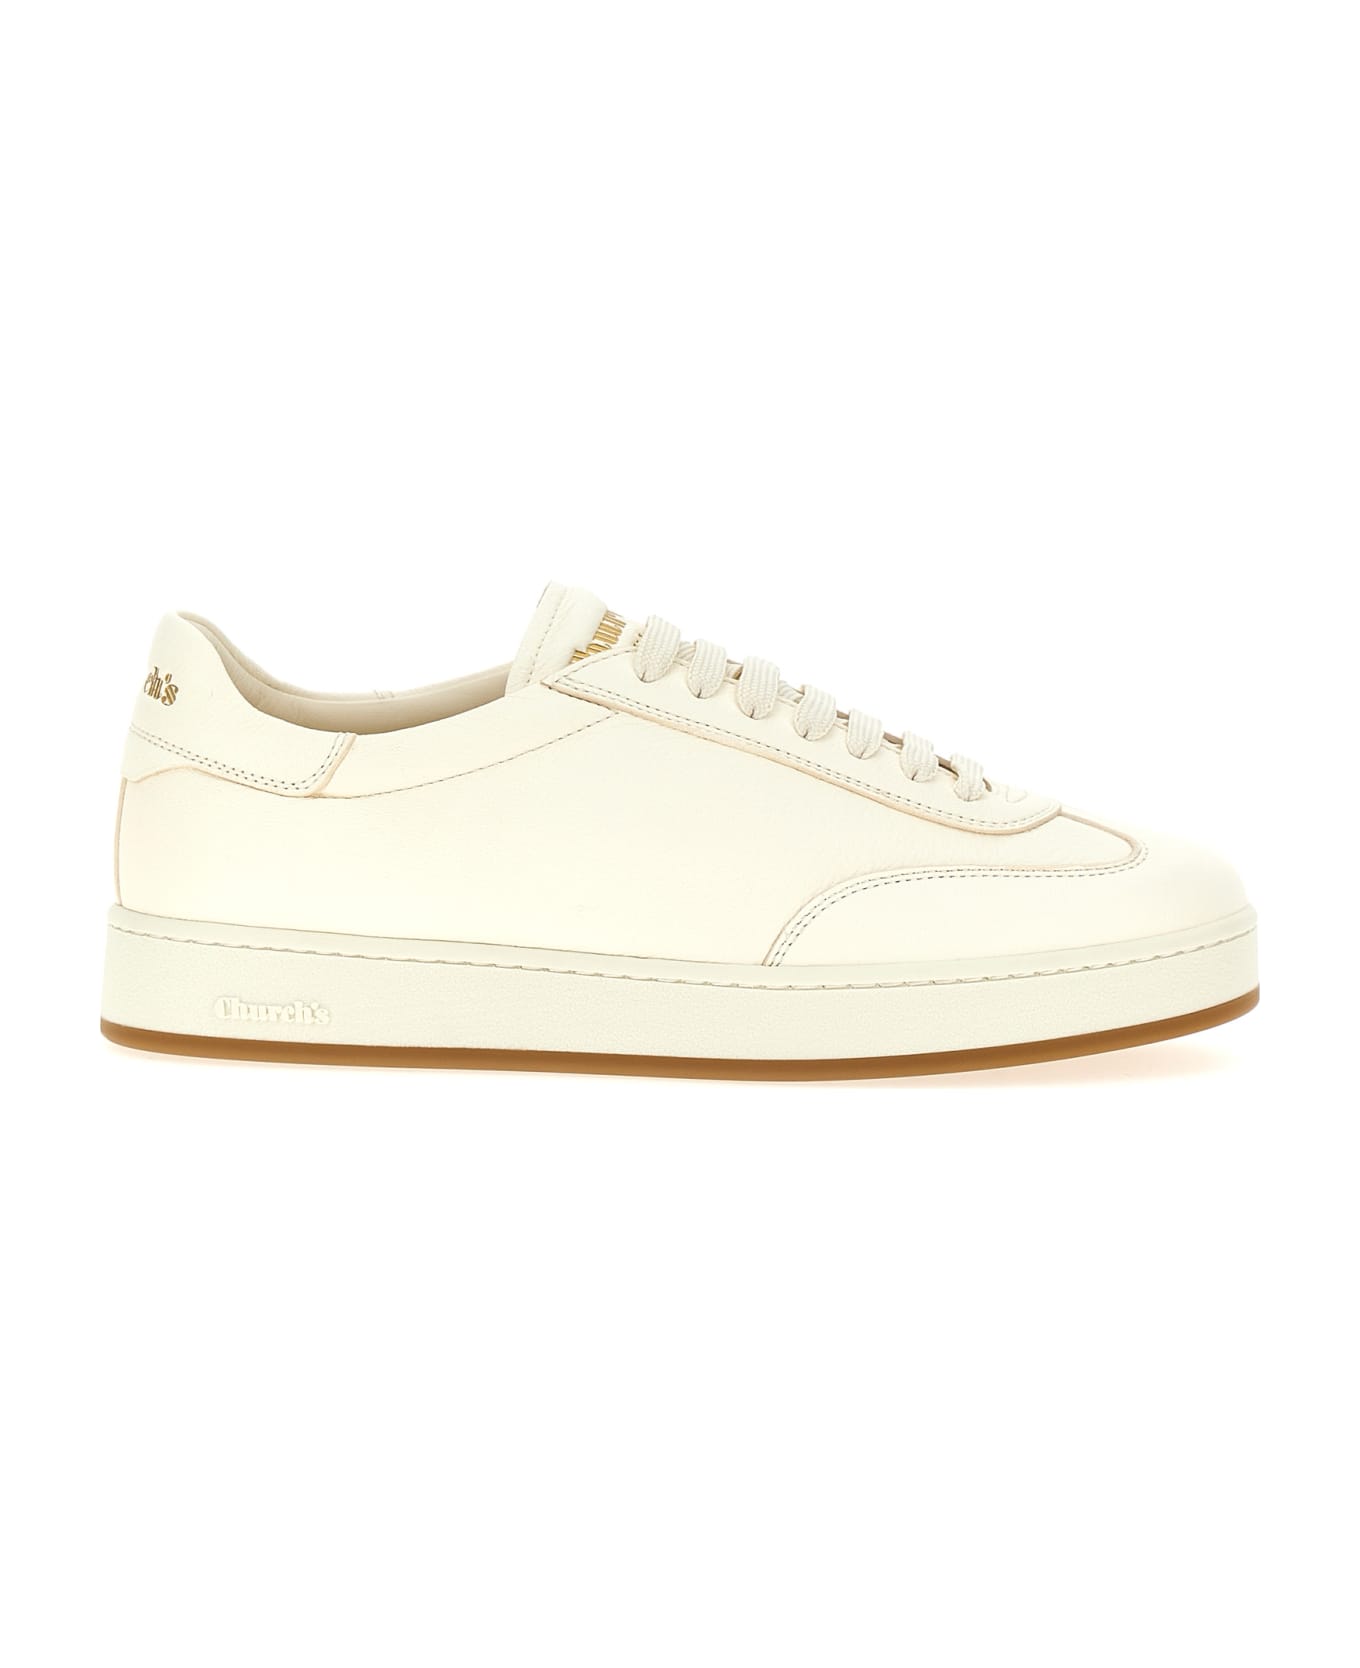 Church's 'laurelle' Sneakers - White